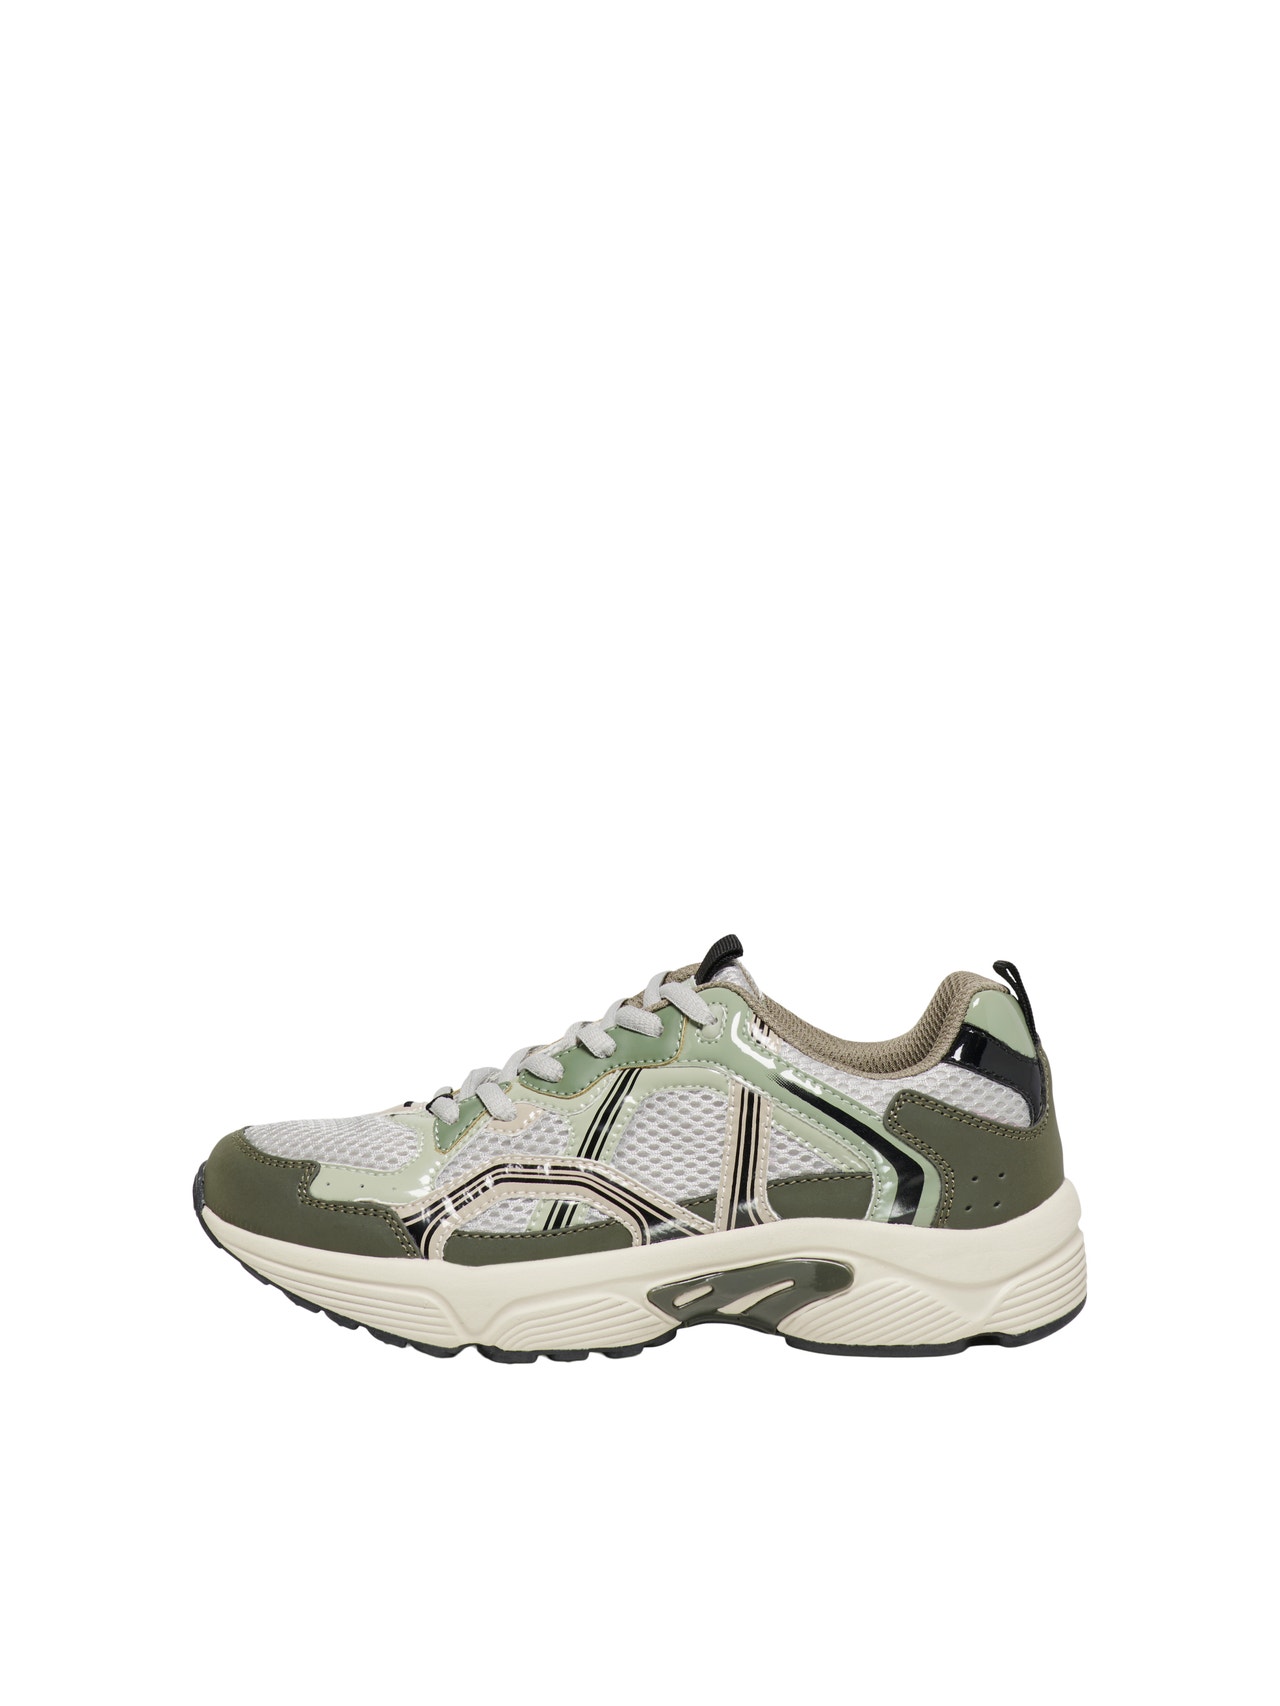 ONLY Round toe Sneaker -Sea Moss - 15304407